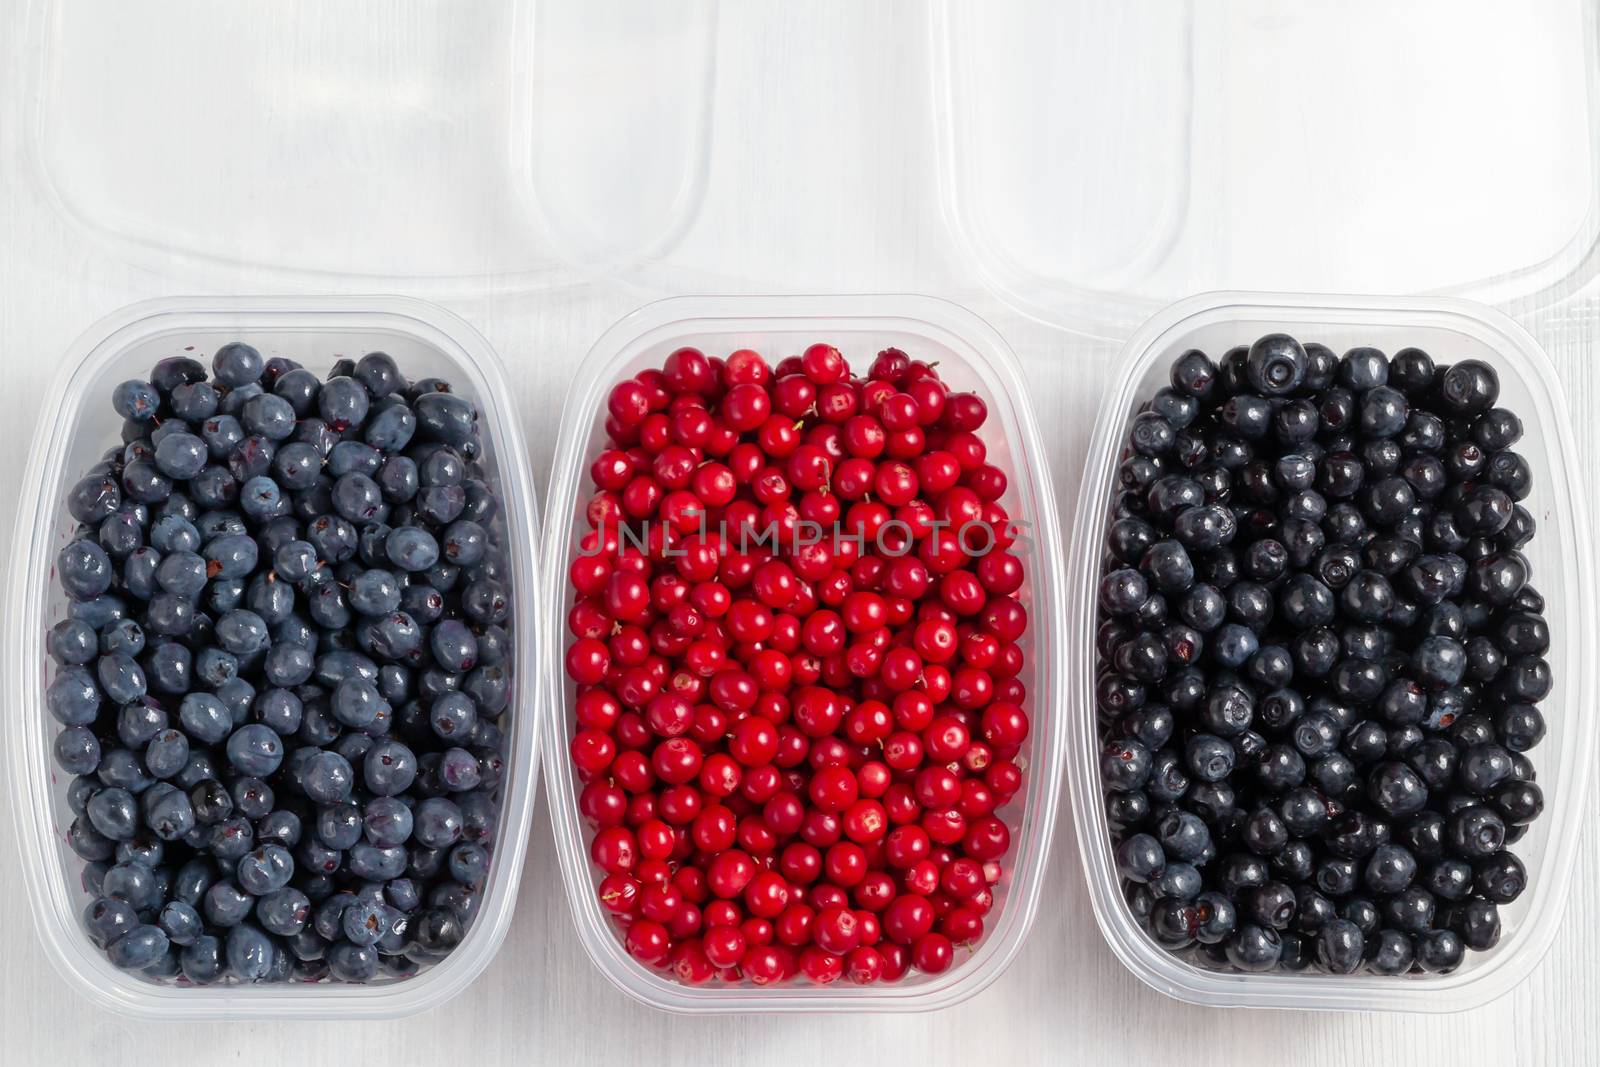 Berries laid out in containers and prepared for freezing and storage, top view by galsand